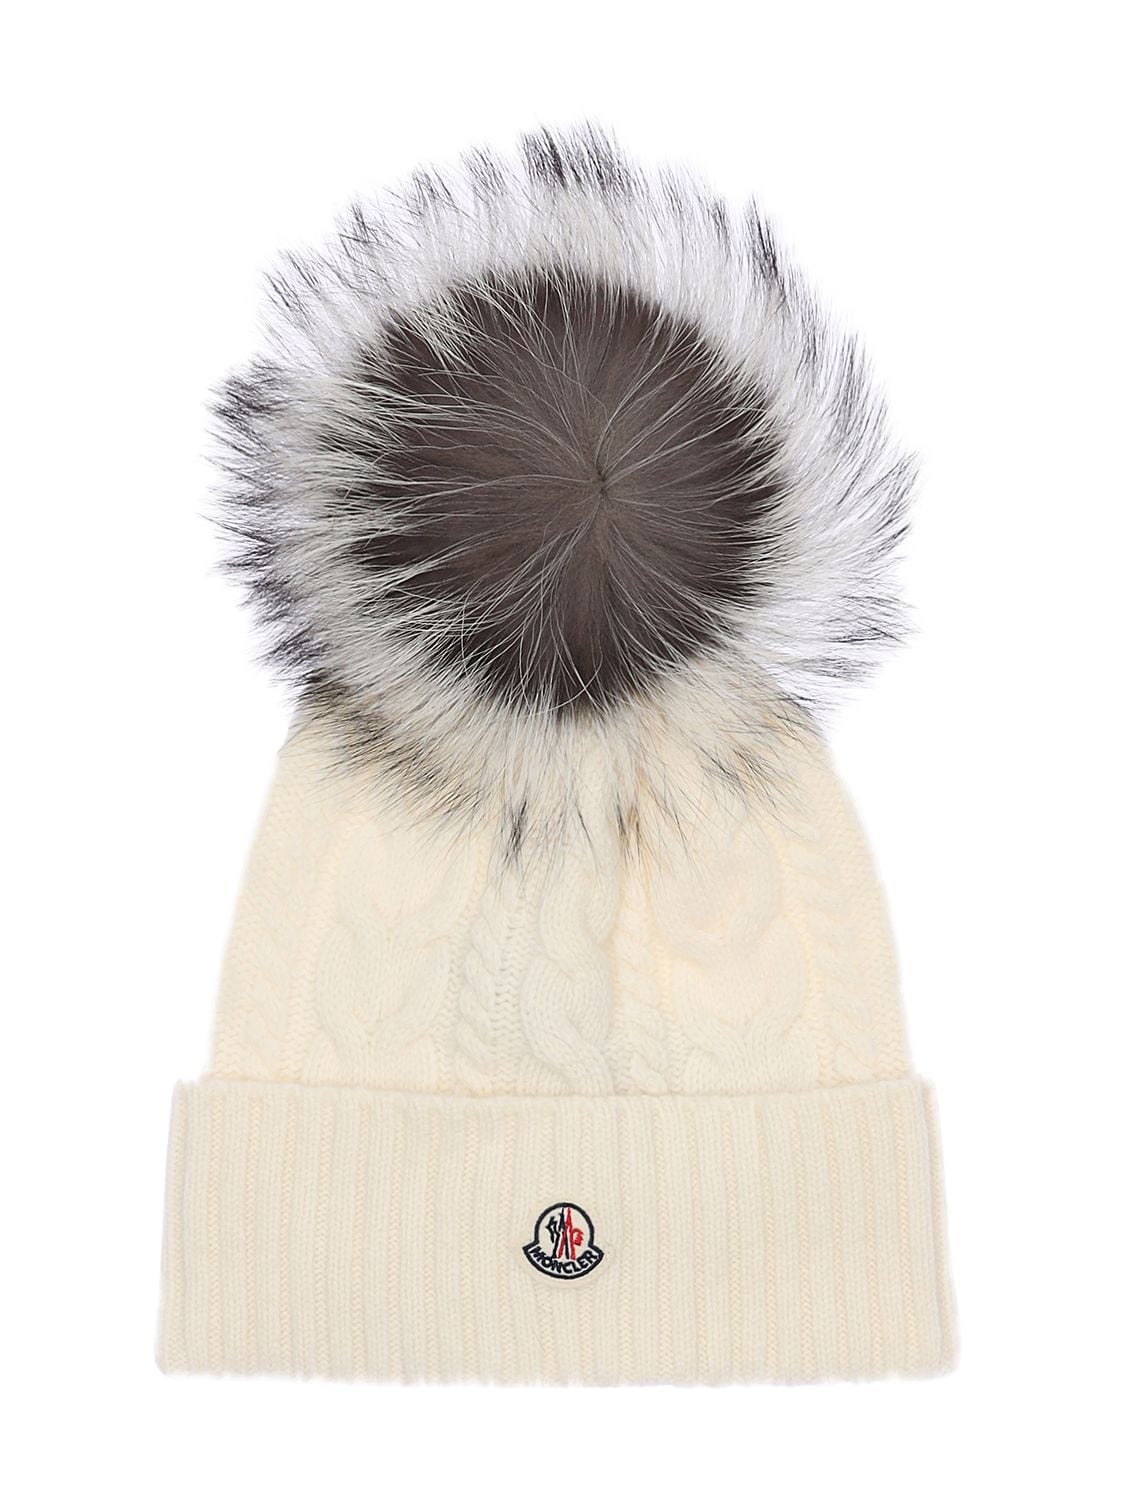 Moncler Wool & Cashmere Knit Hat W/ Fur Pompom In White